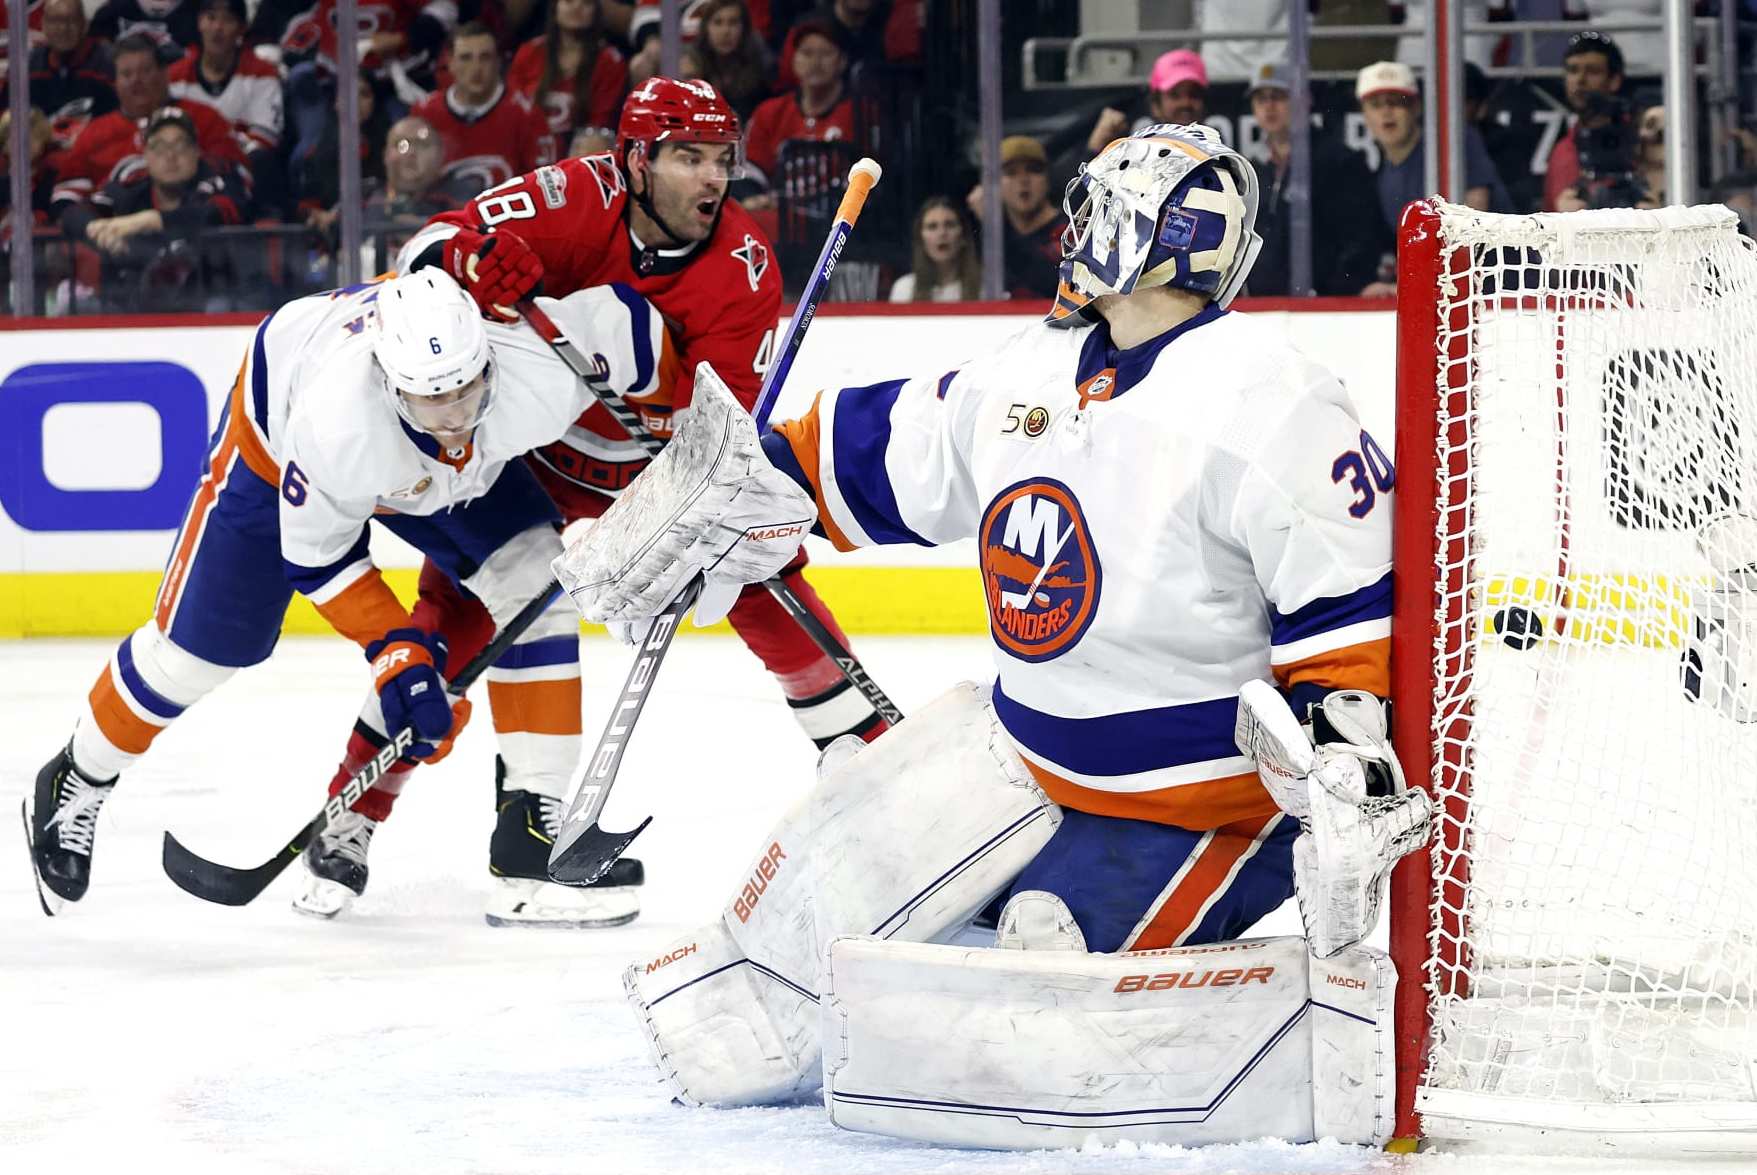 Hughes has first NHL hat trick, Devils beat Capitals 5-1 - ABC7 New York